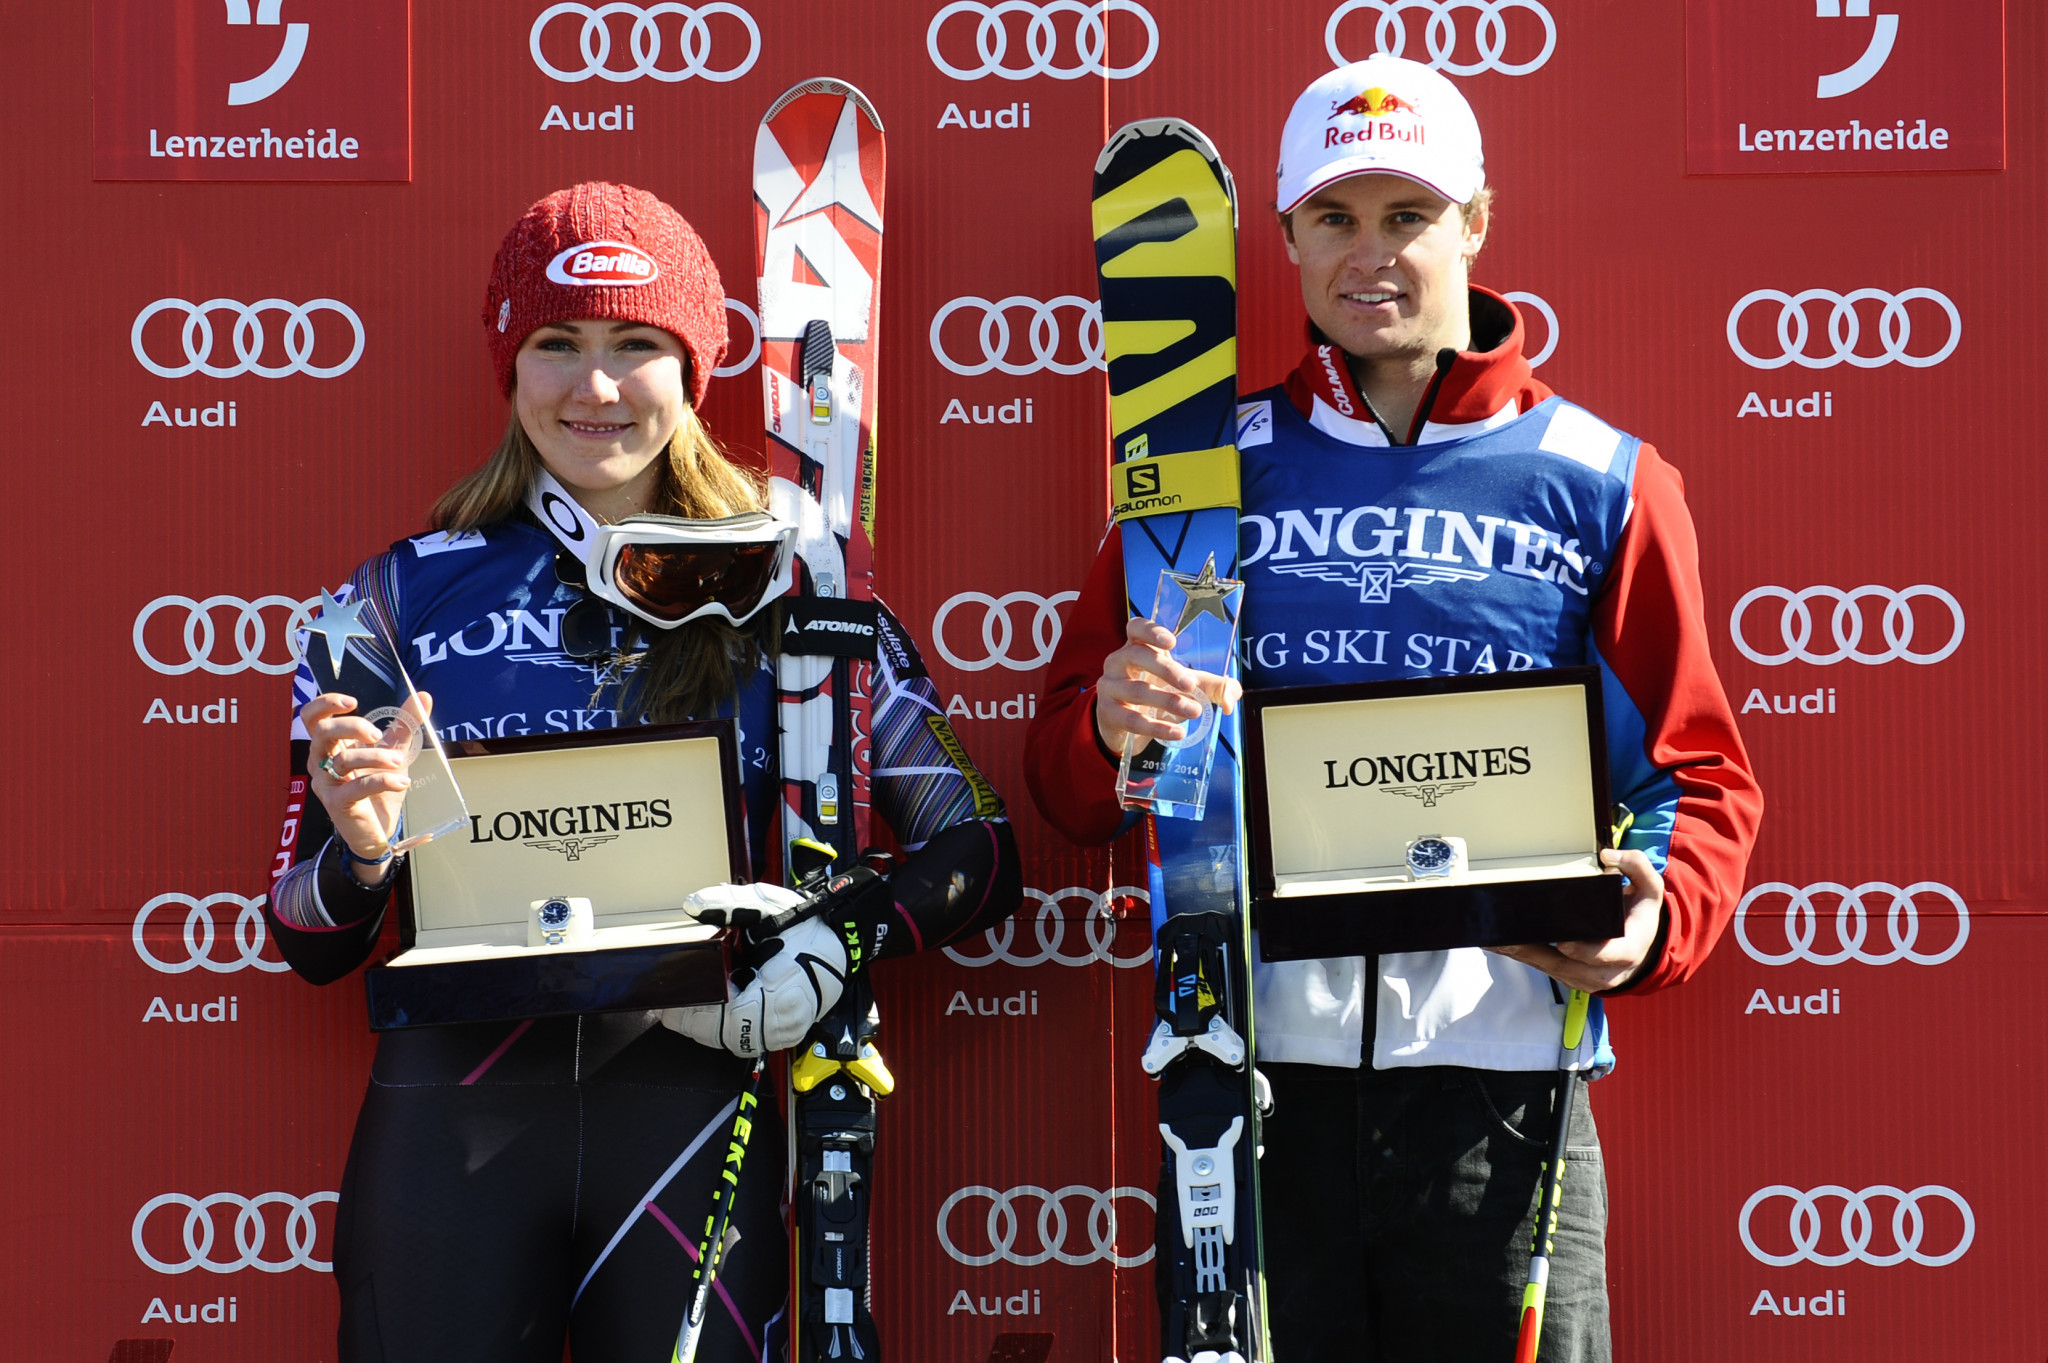 Longines have been long-term supporters of the Alpine Ski World Cup ©Getty Images